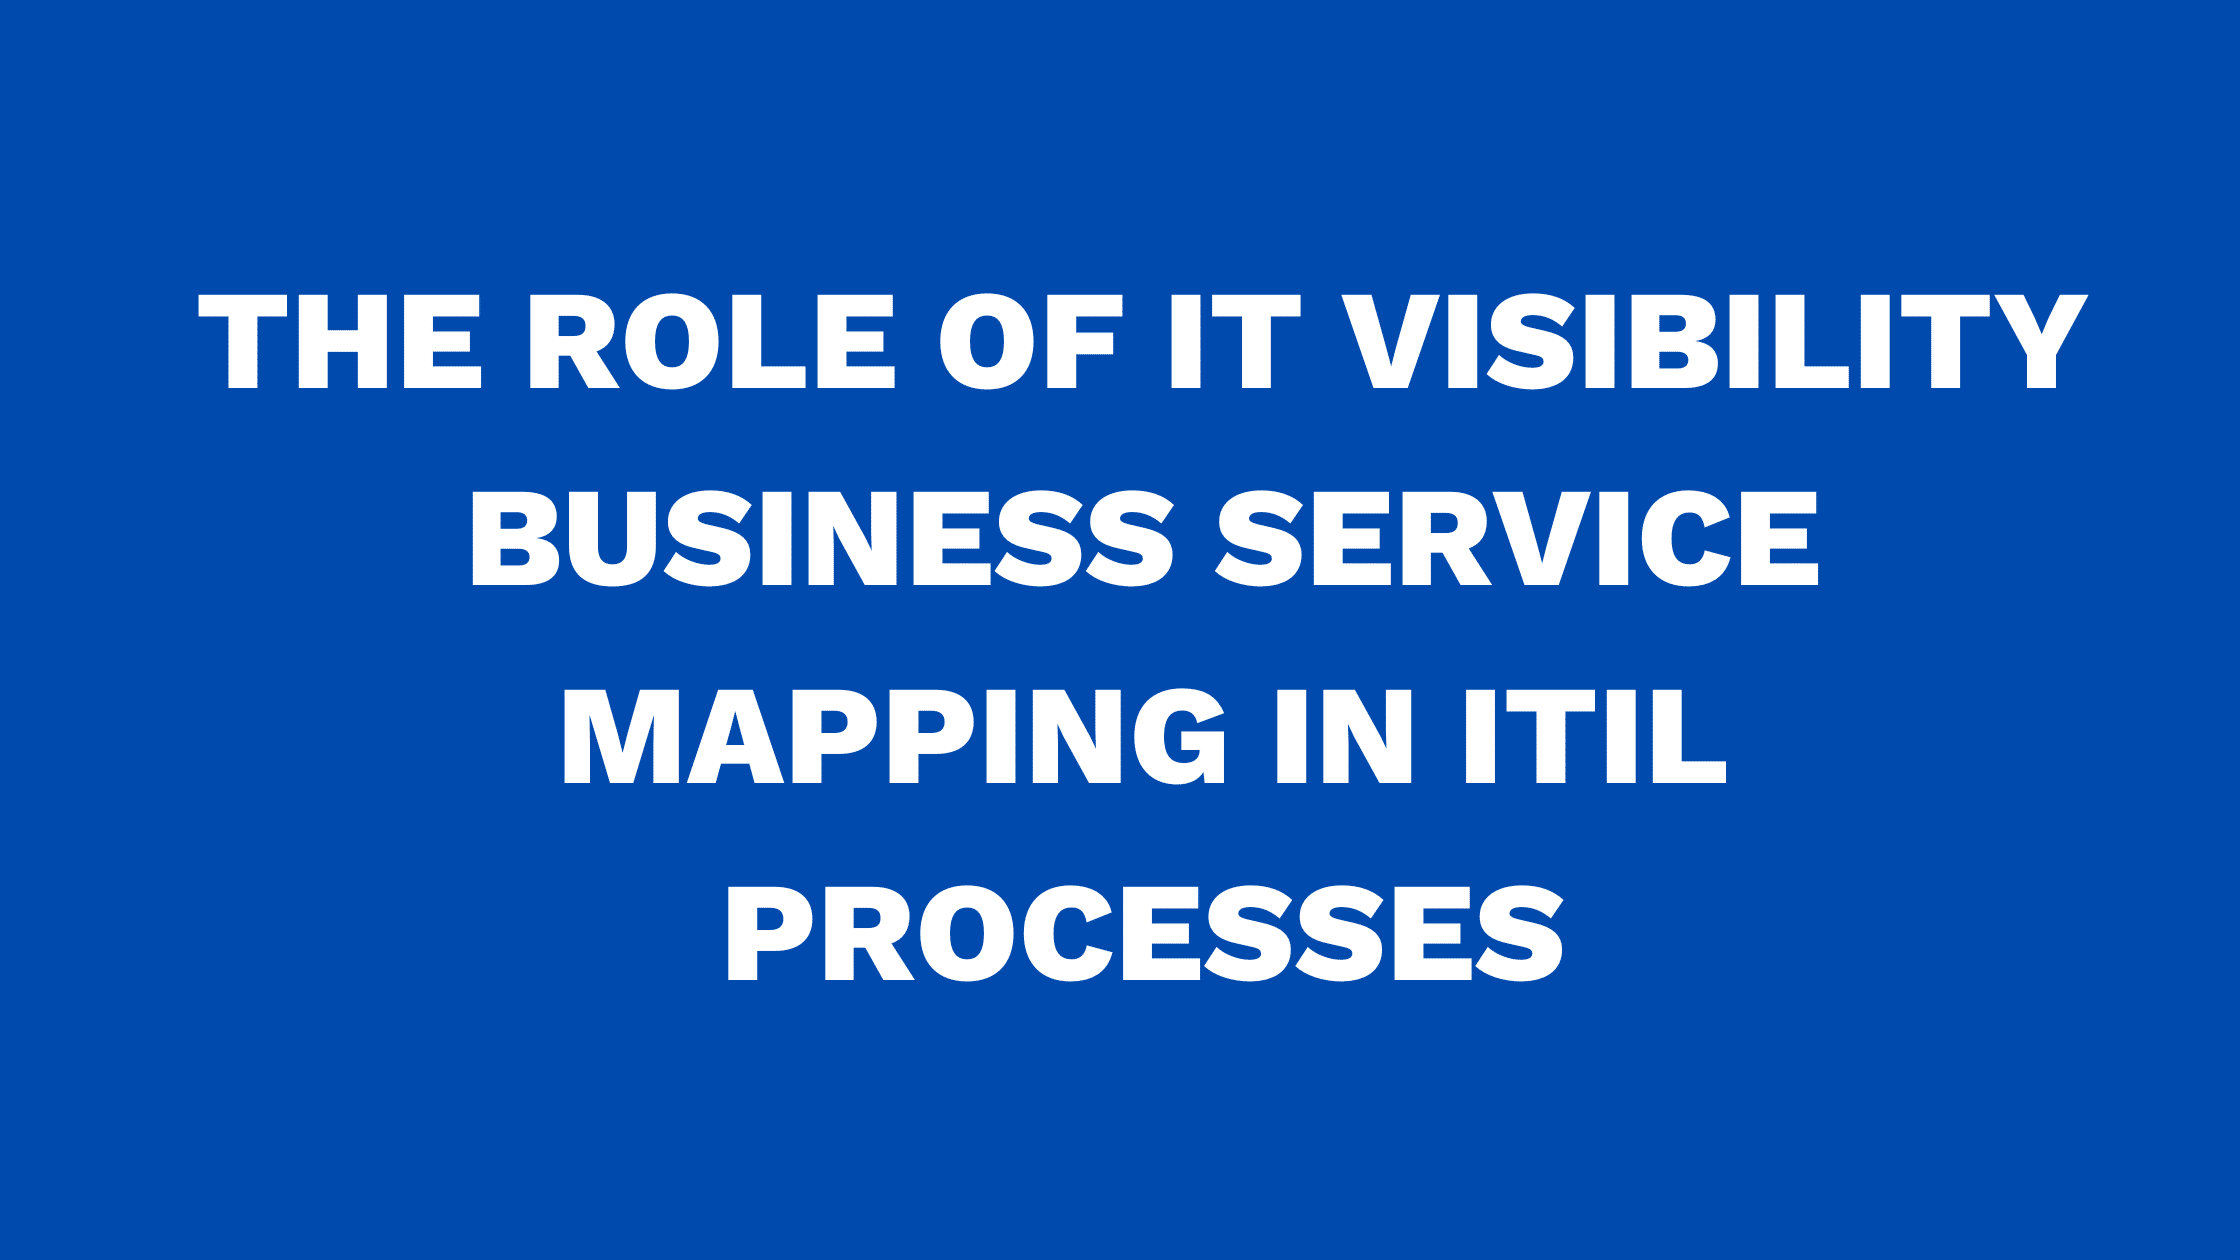 The role of IT Visibility Business Service Mapping in ITIL processes